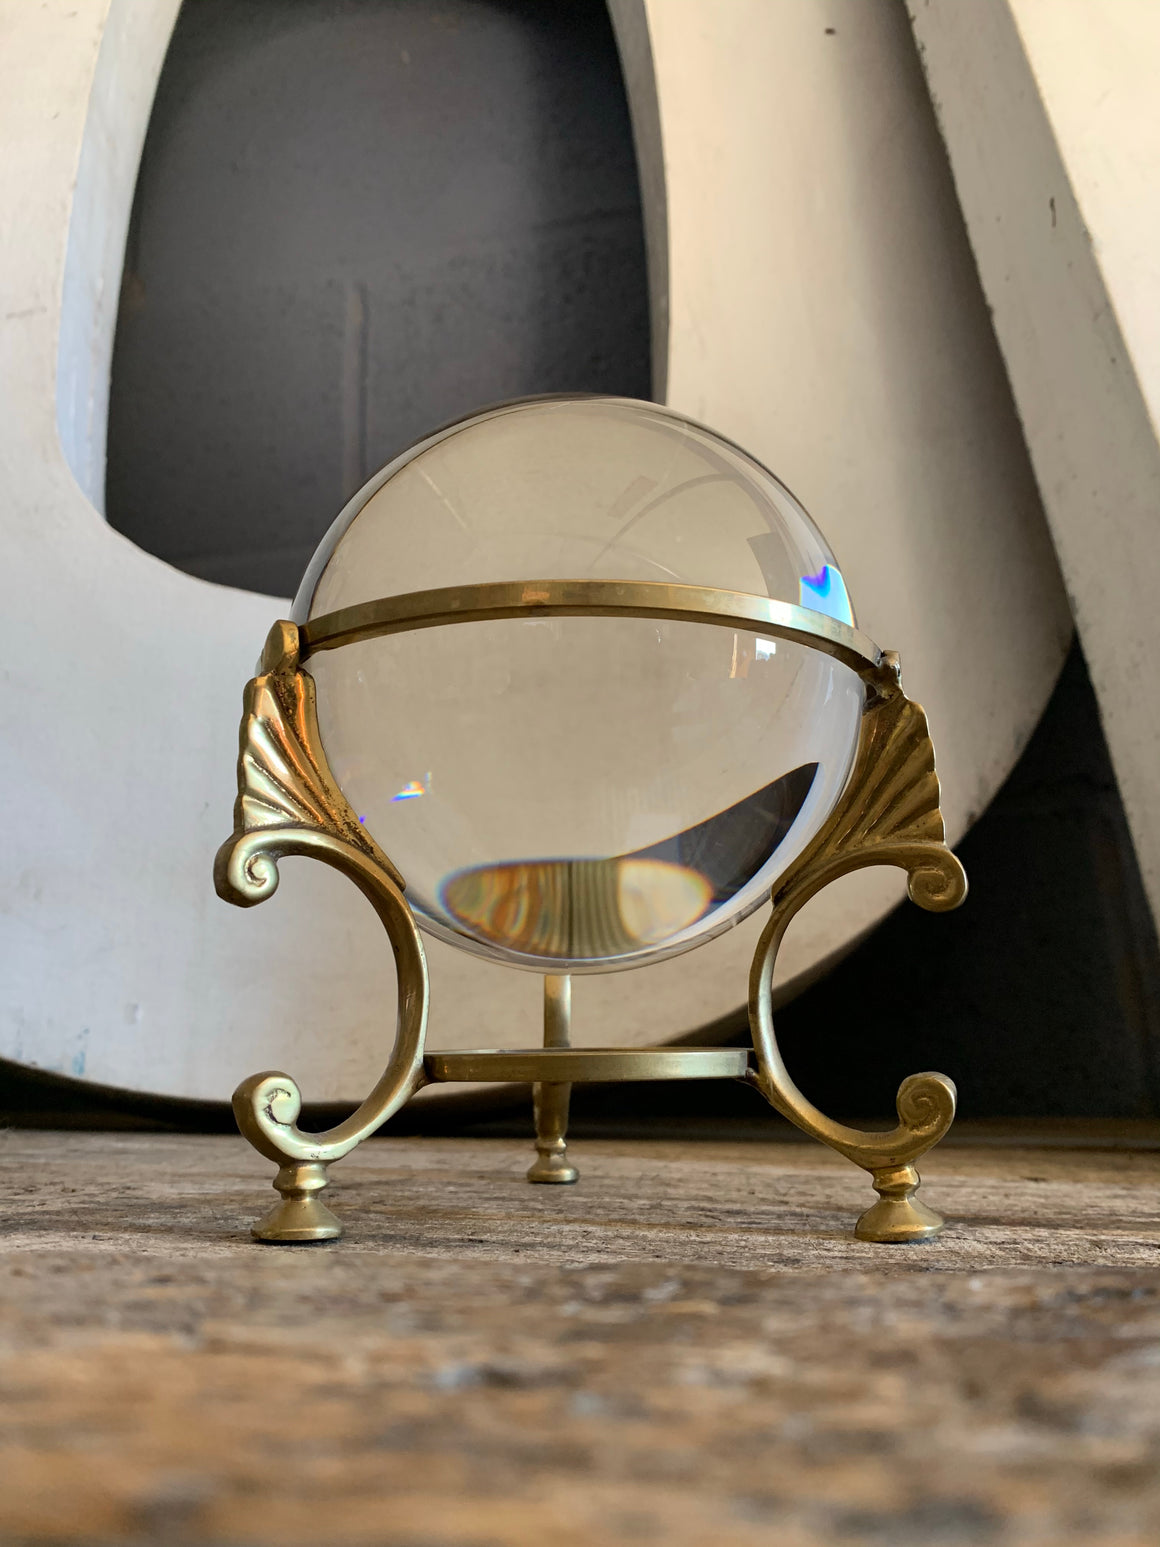 A large fortune teller's crystal ball on a brass tripod base